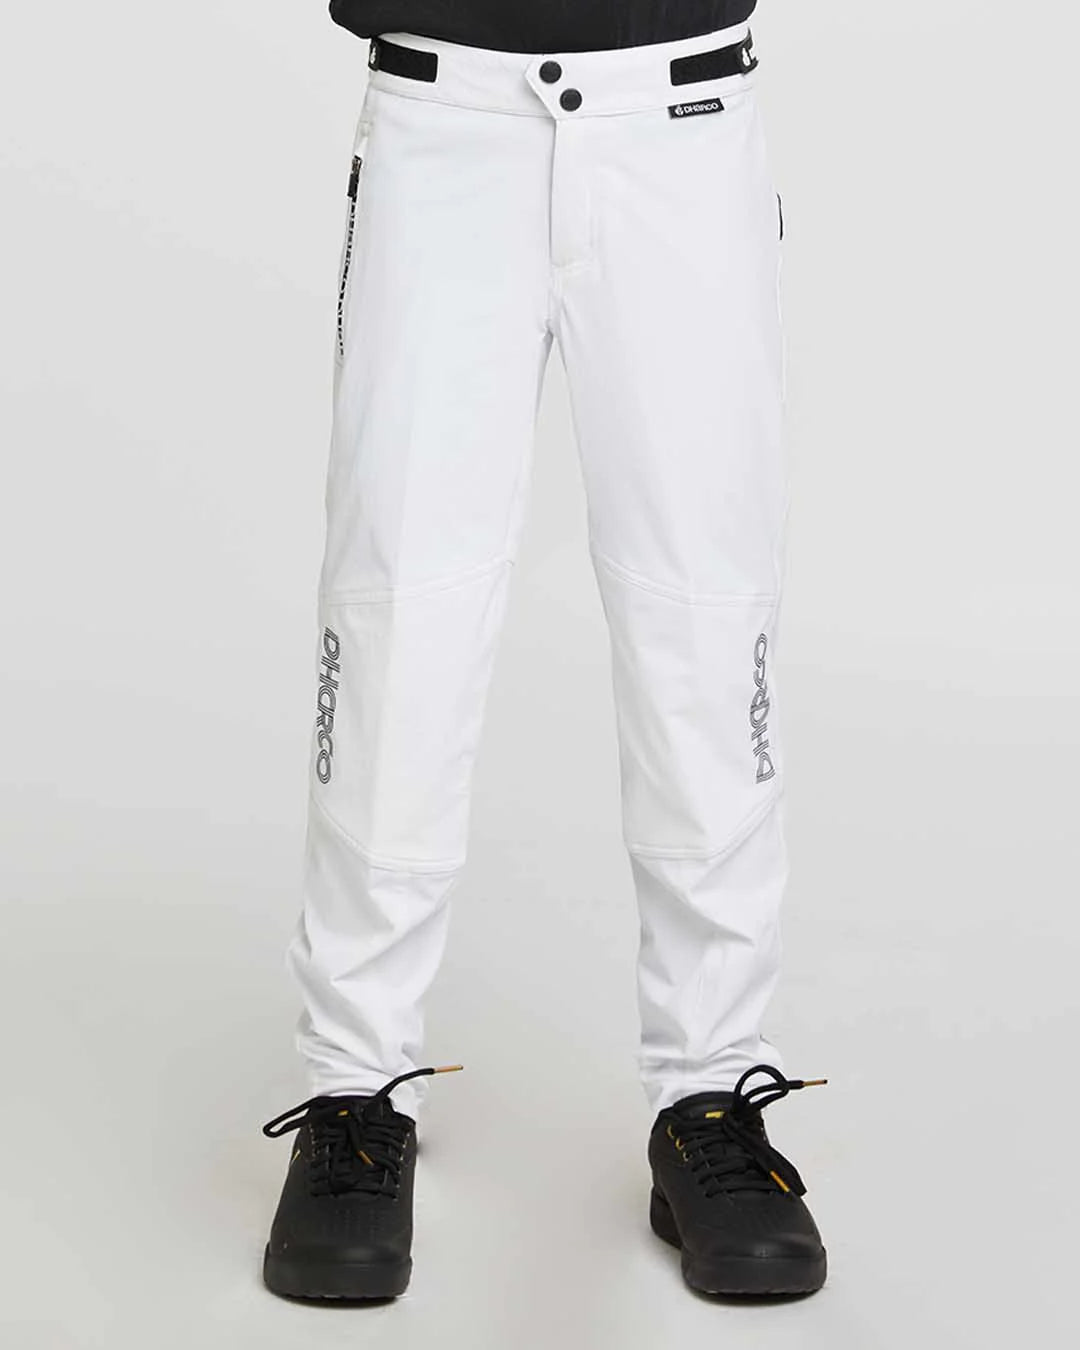 Dharco Youth Gravity Pants